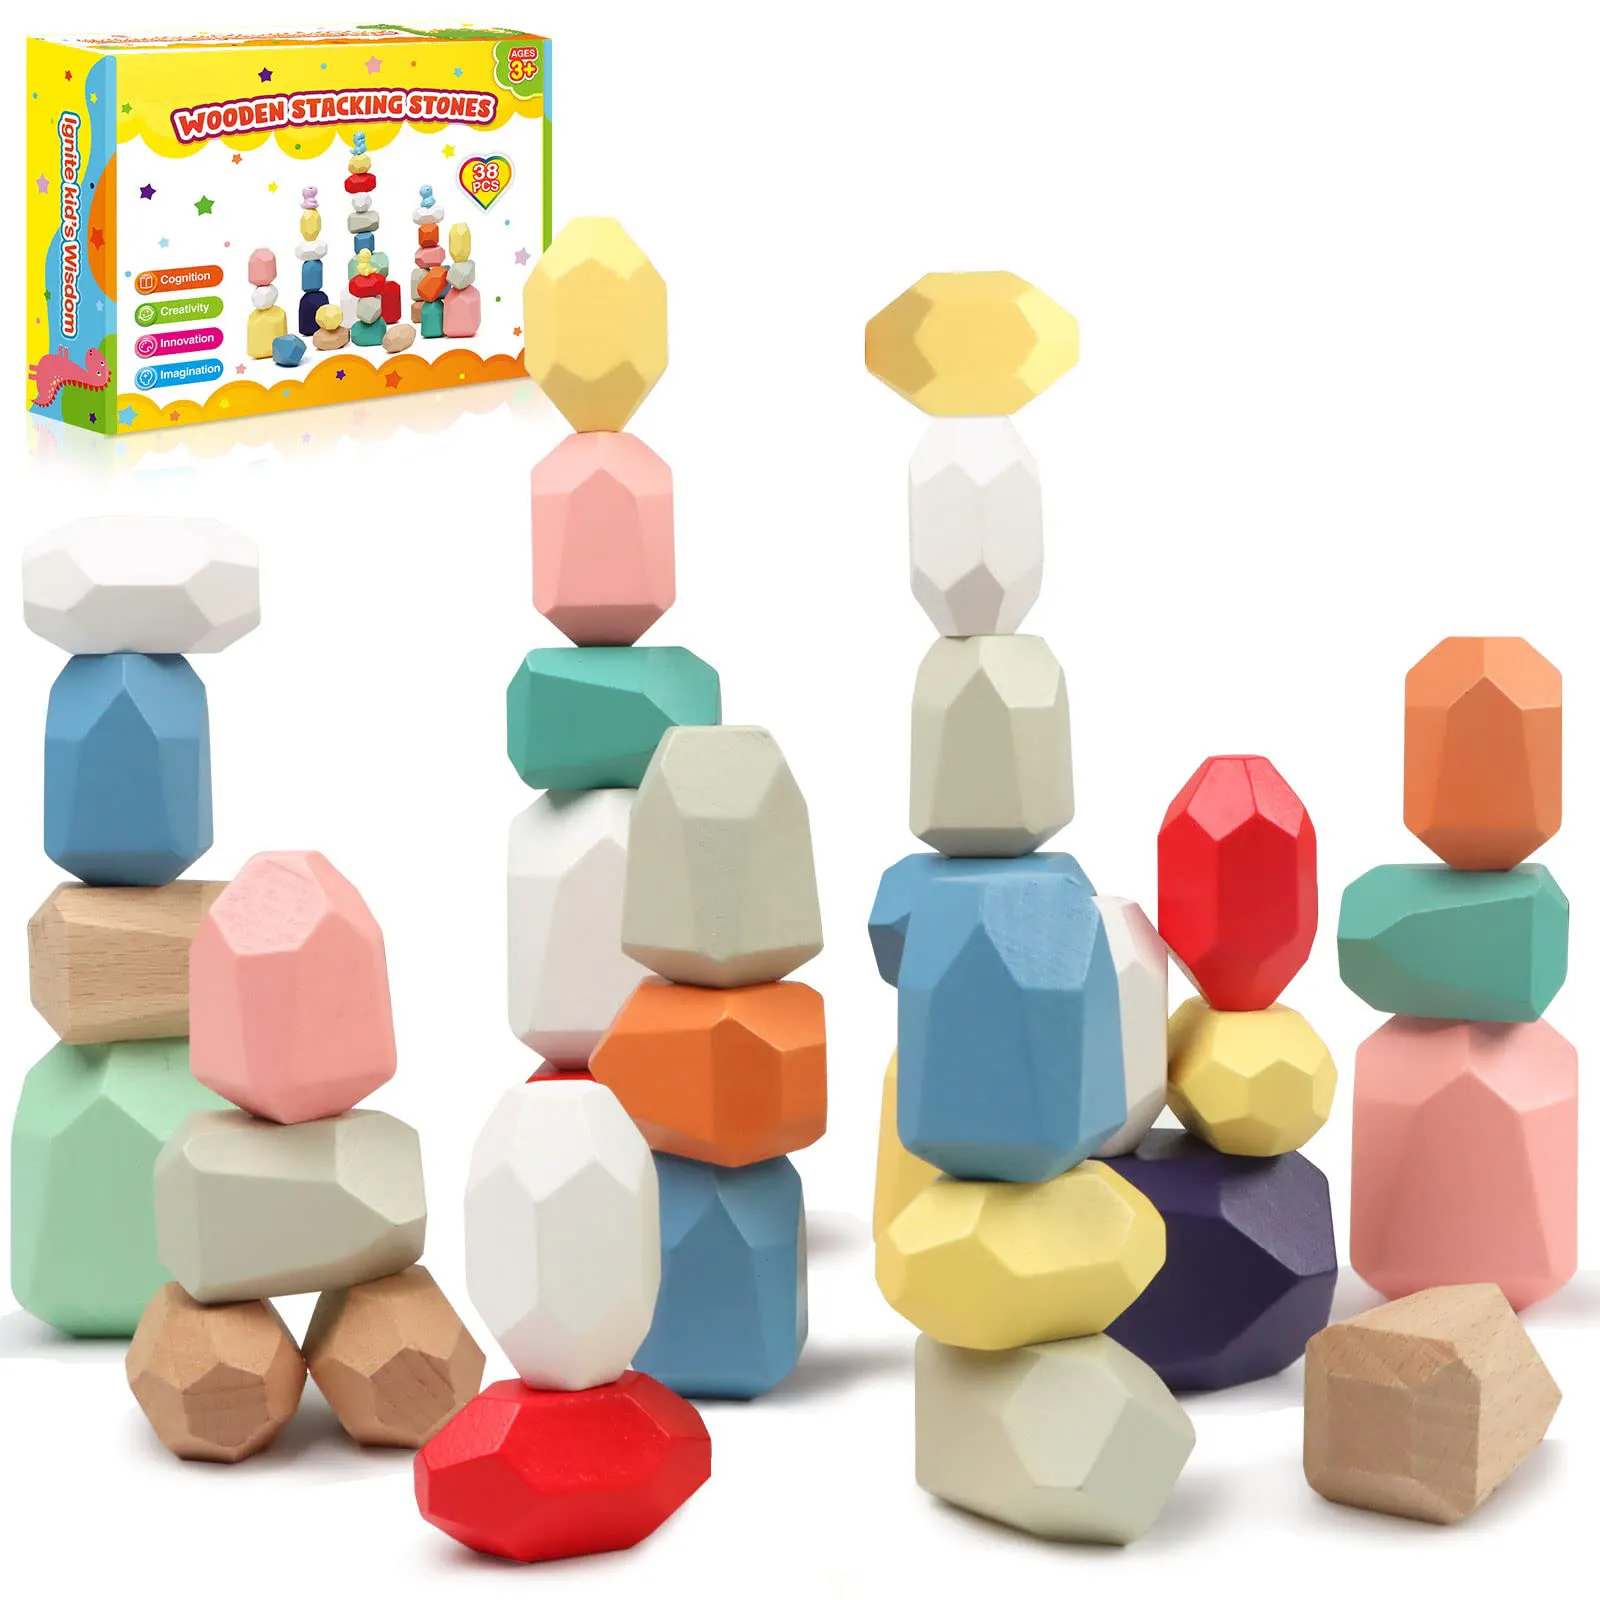 16 Colorful Wood Montessori Toy Building Block Set Stacking Stones Large Wooden Blocks children's education toys for Toddlers